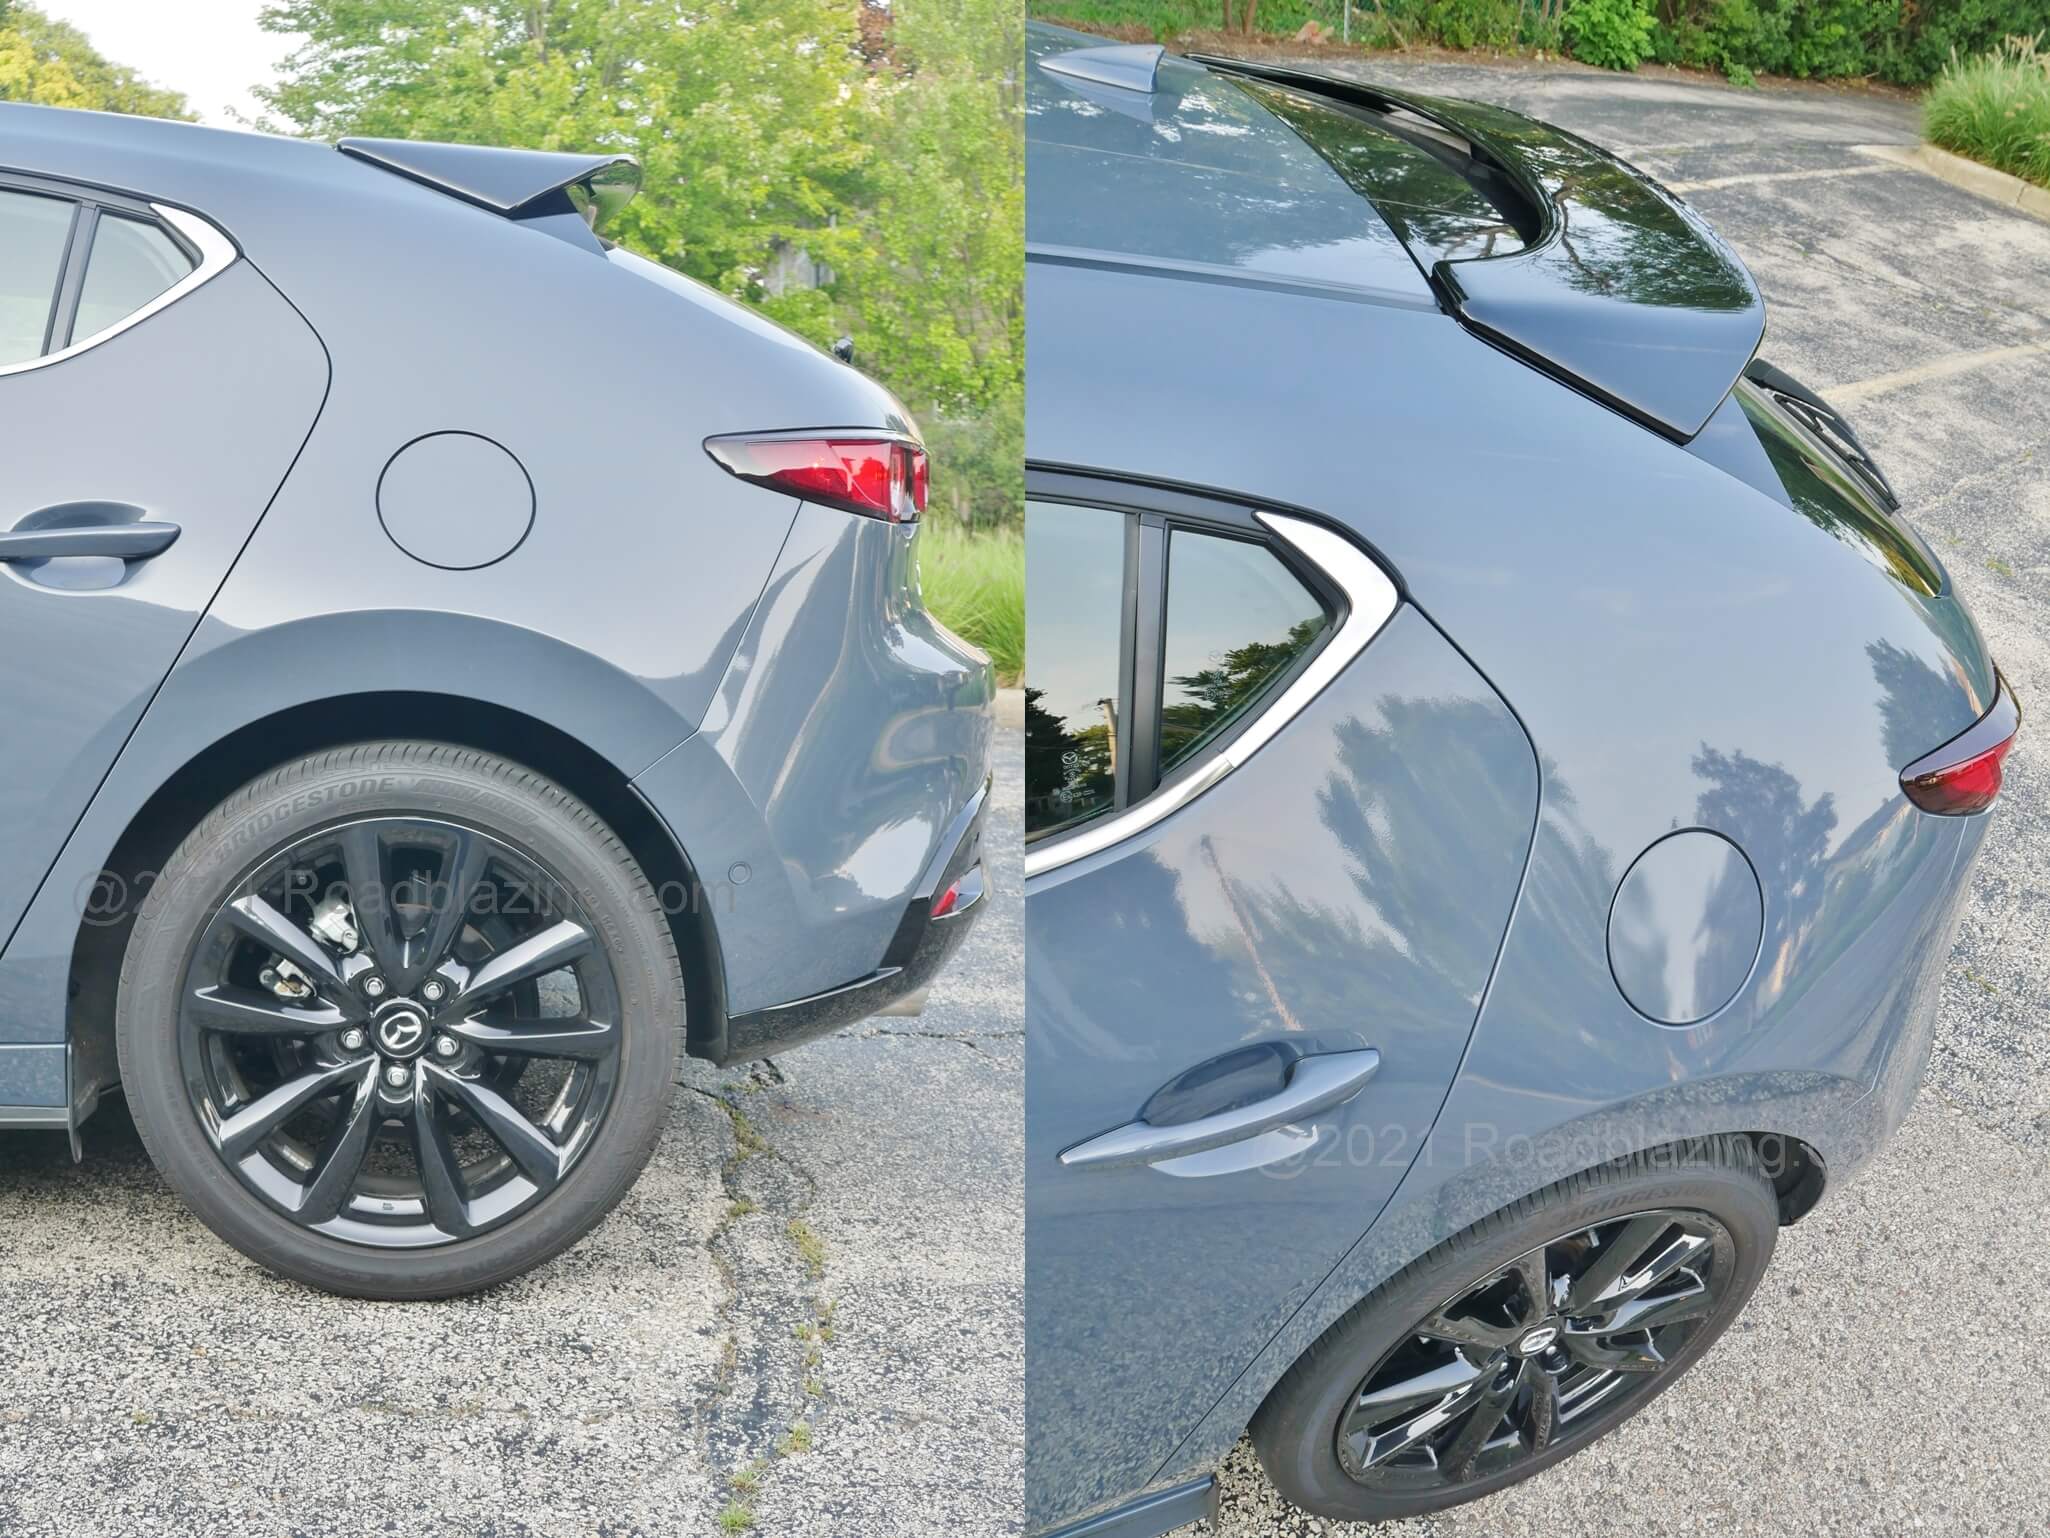 2021 Mazda 3 2.5 Turbo Hatchback: Switching to the torsion beam suspension provides cohesive rear wheel lateral control to reduce bump steer. While rear brake rotors lack venting, the binders respond firmly without judder. Piano black splitter roof spoiler is optional.